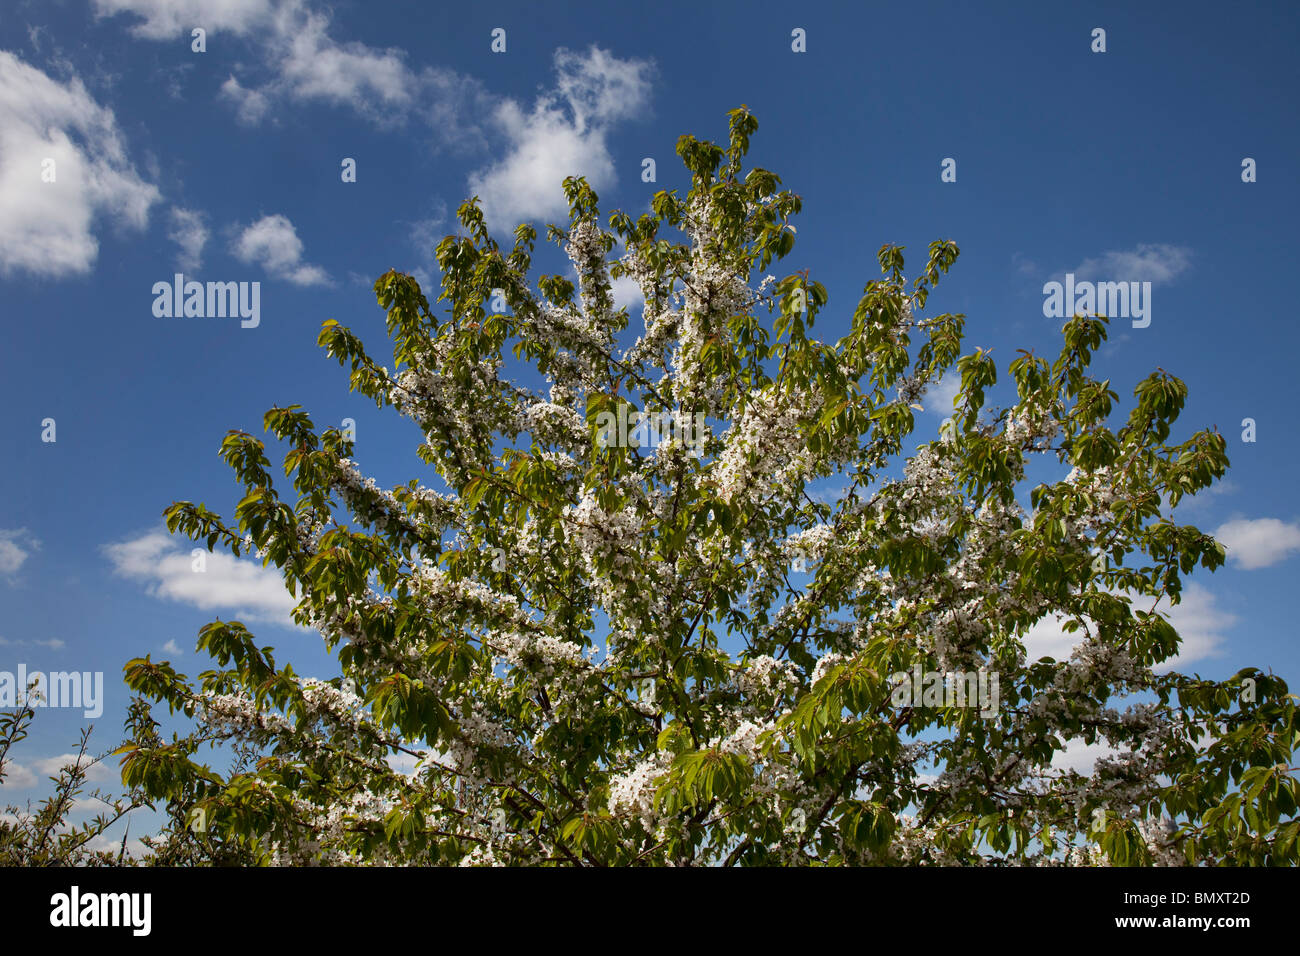 Spring Blossom on the trees marks the seasons changing and warmer weather. Stock Photo